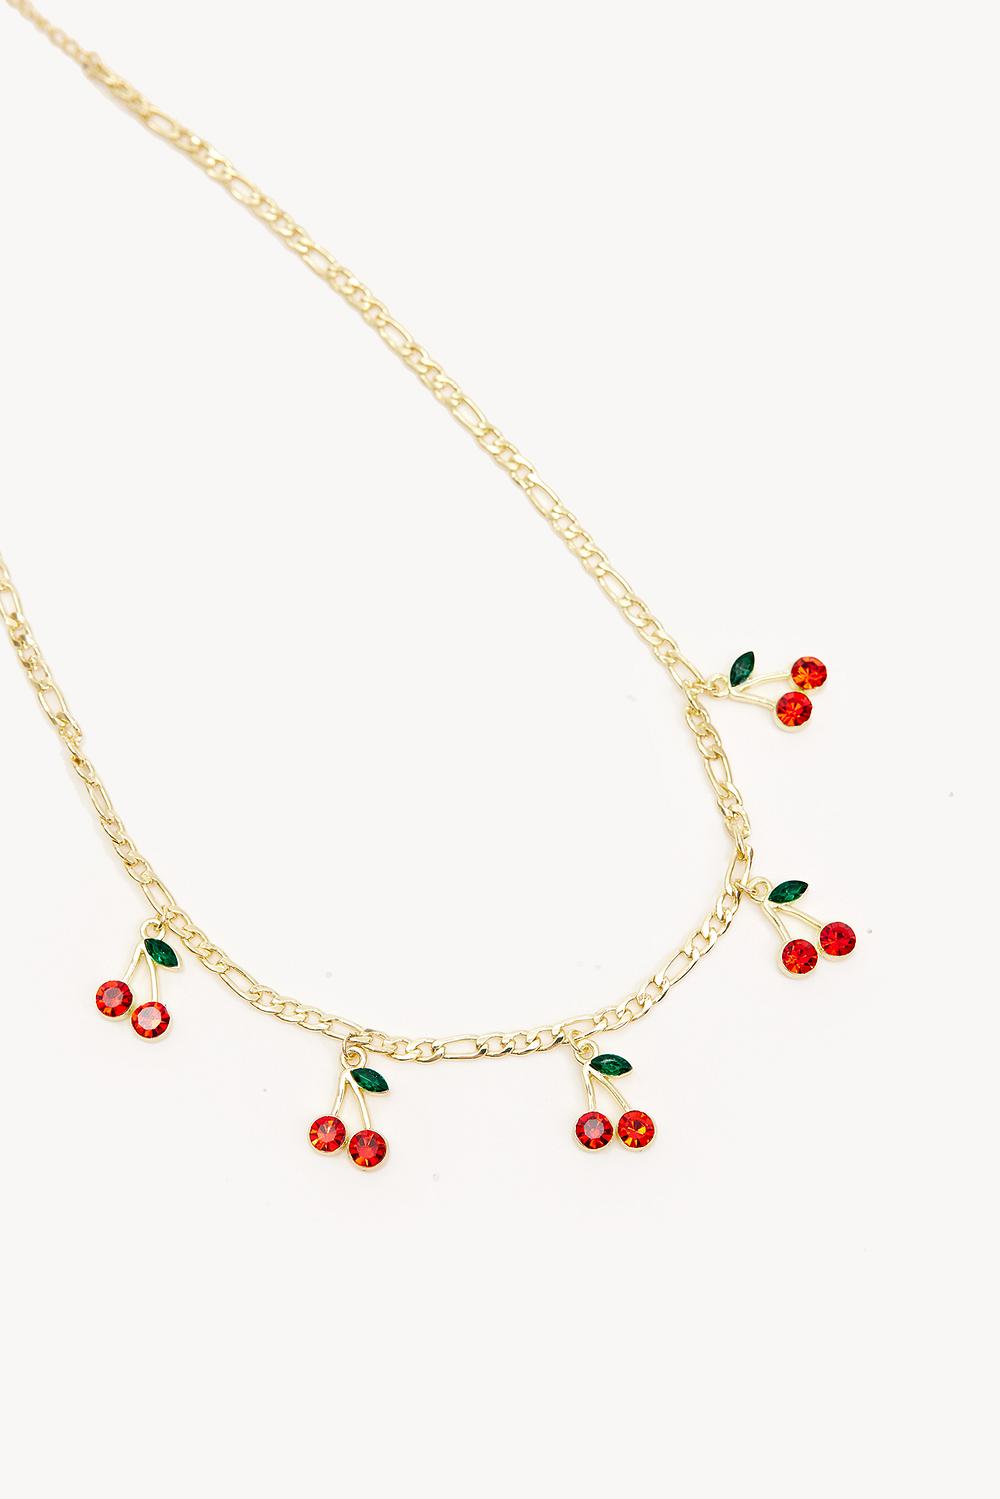 Gold necklace with cherry pendants